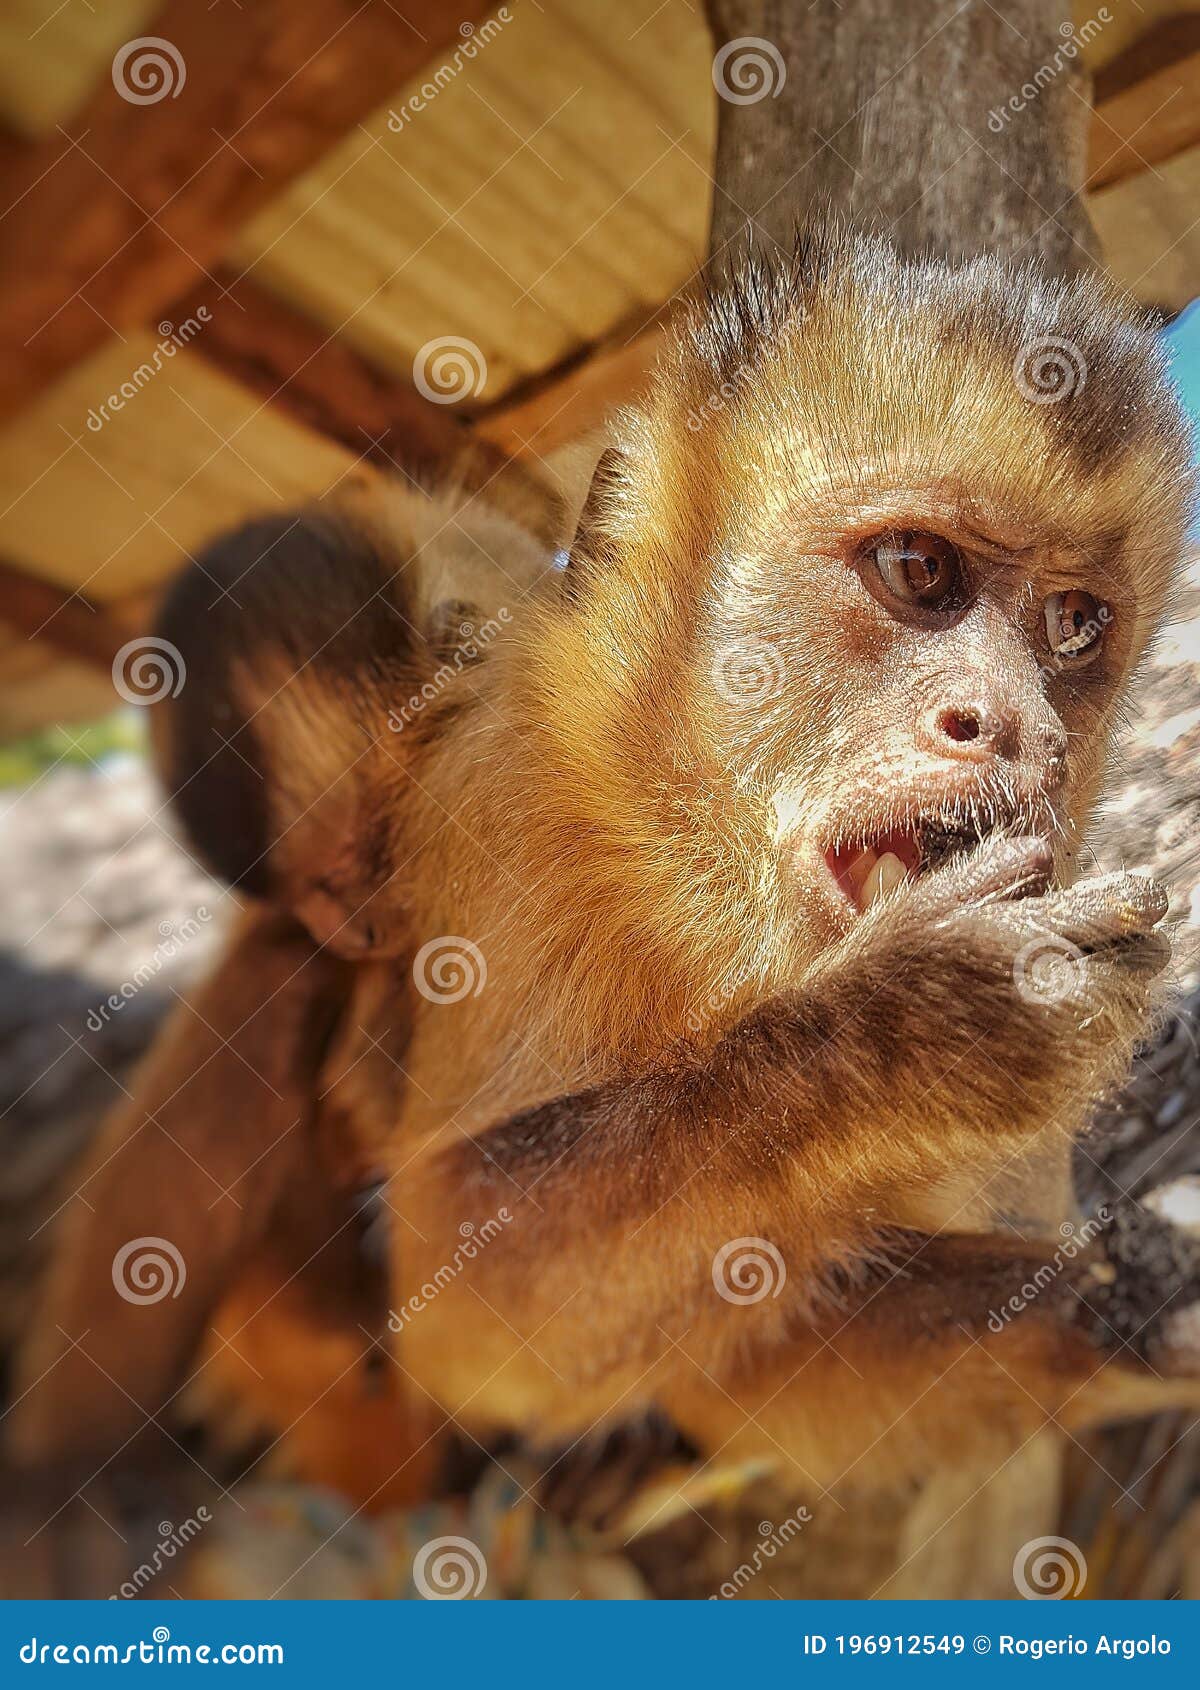 capuchin monkey - macaco prego - with hand in mouth